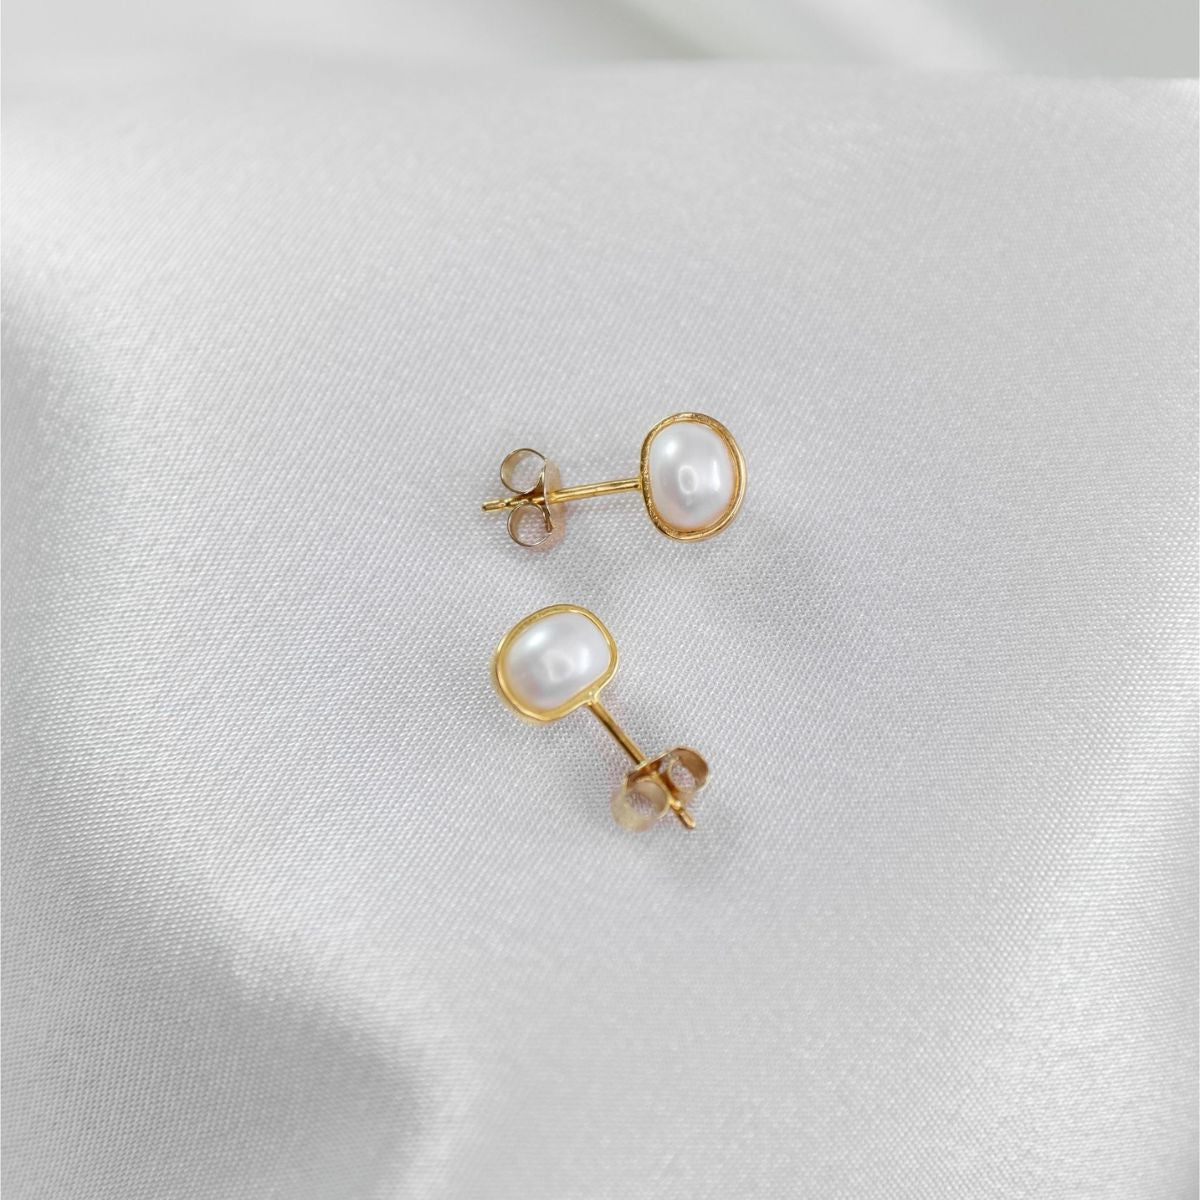 a pair of white pearl earrings on a white cloth